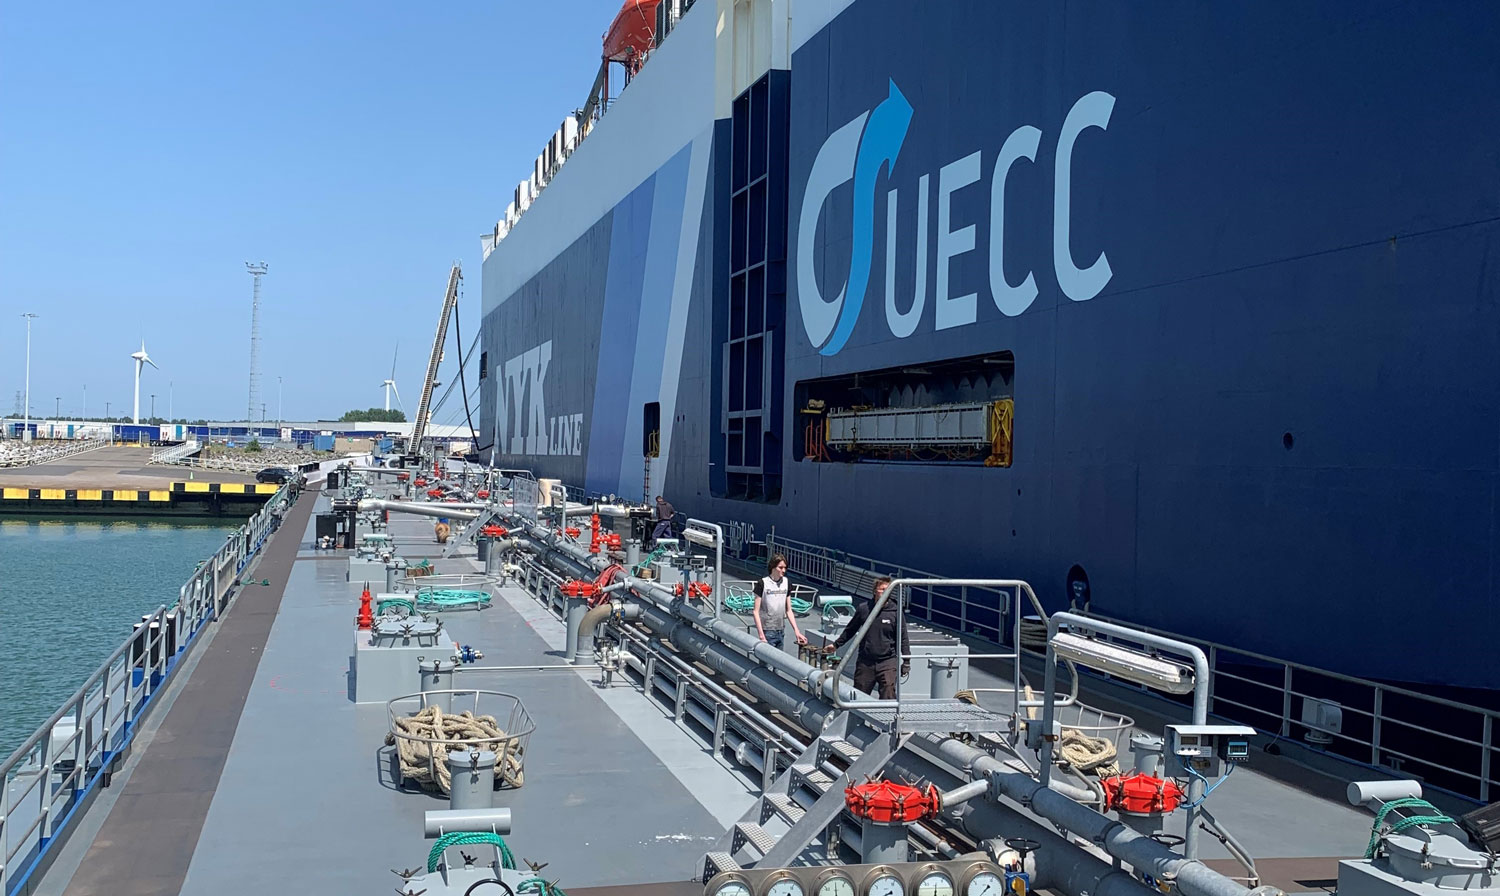 A car carrier is being bunkered with sustainable biofuel in the port of Vlissingen